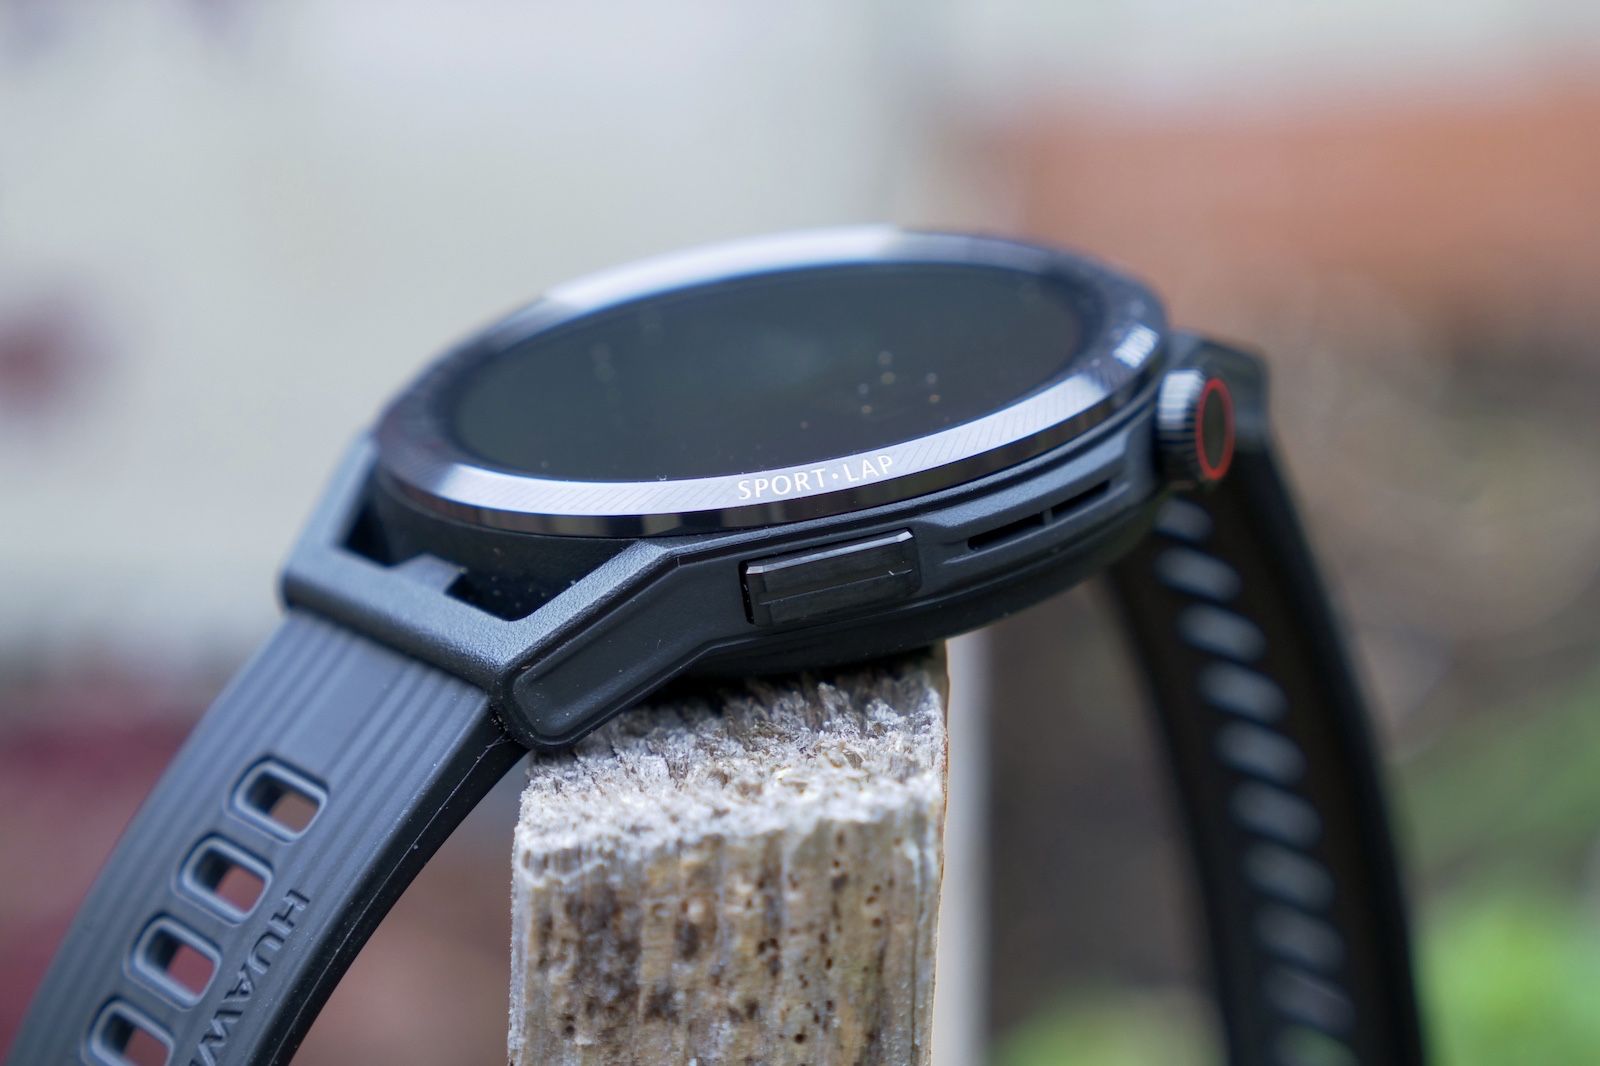 Huawei Watch GT Runner review: The best smartwatch from Huawei yet